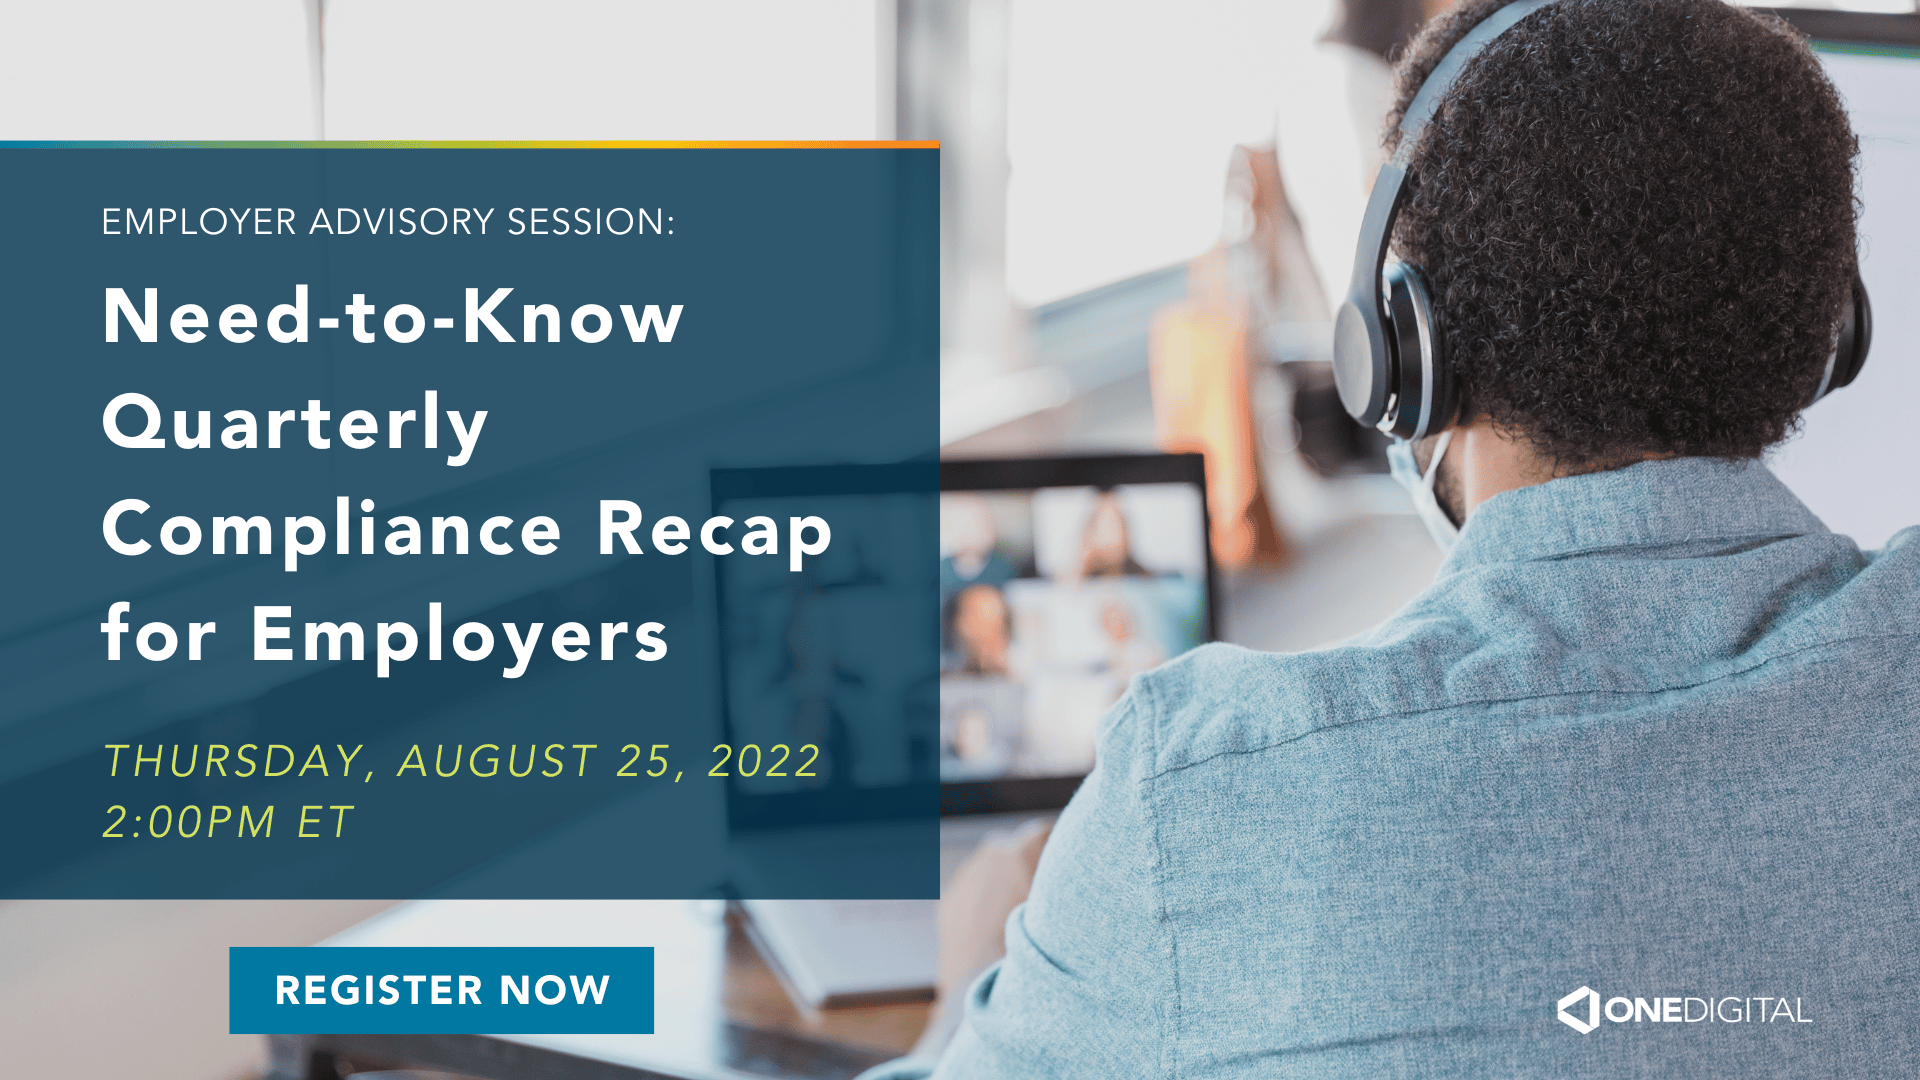 Employer Advisory Session: Need-to-Know Quarterly Compliance Recap for Employers | 8/25/22 at 2pm ET